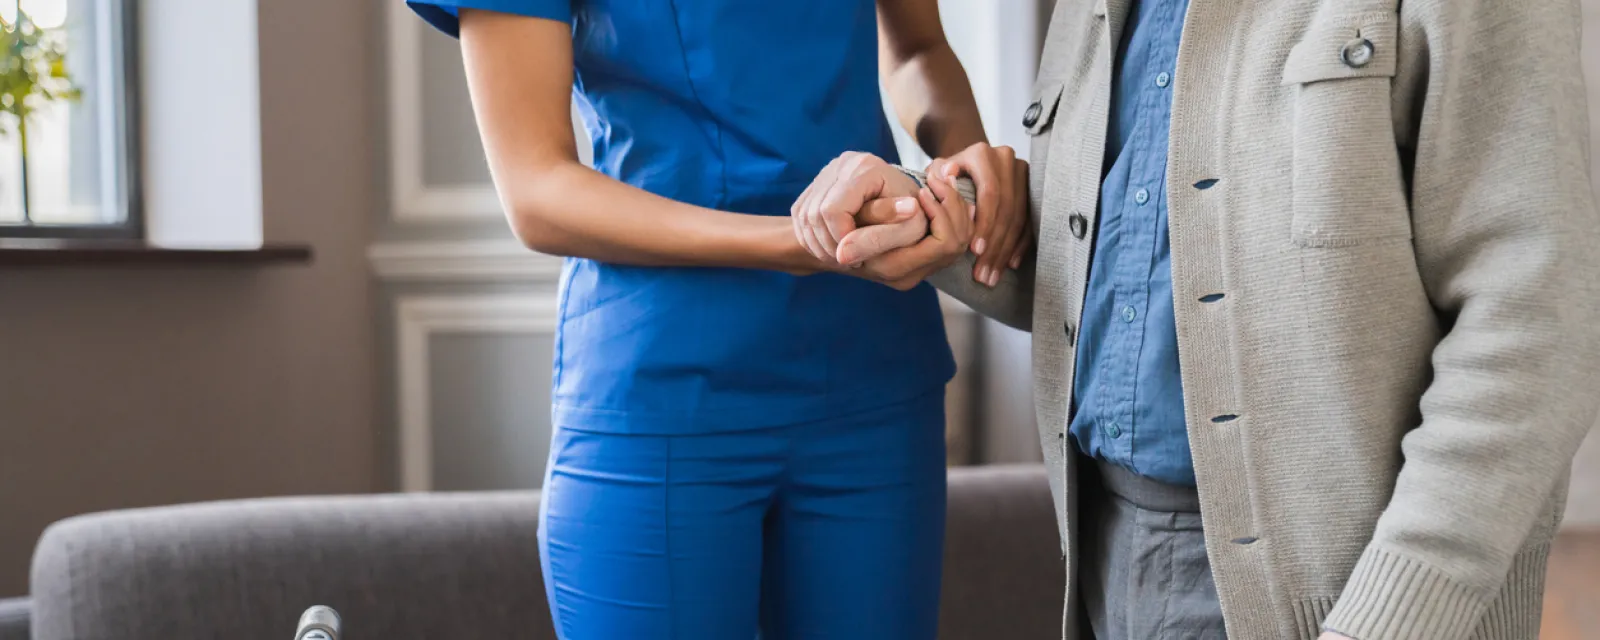 Nurse holding the hand of a man with Parkinson's disease